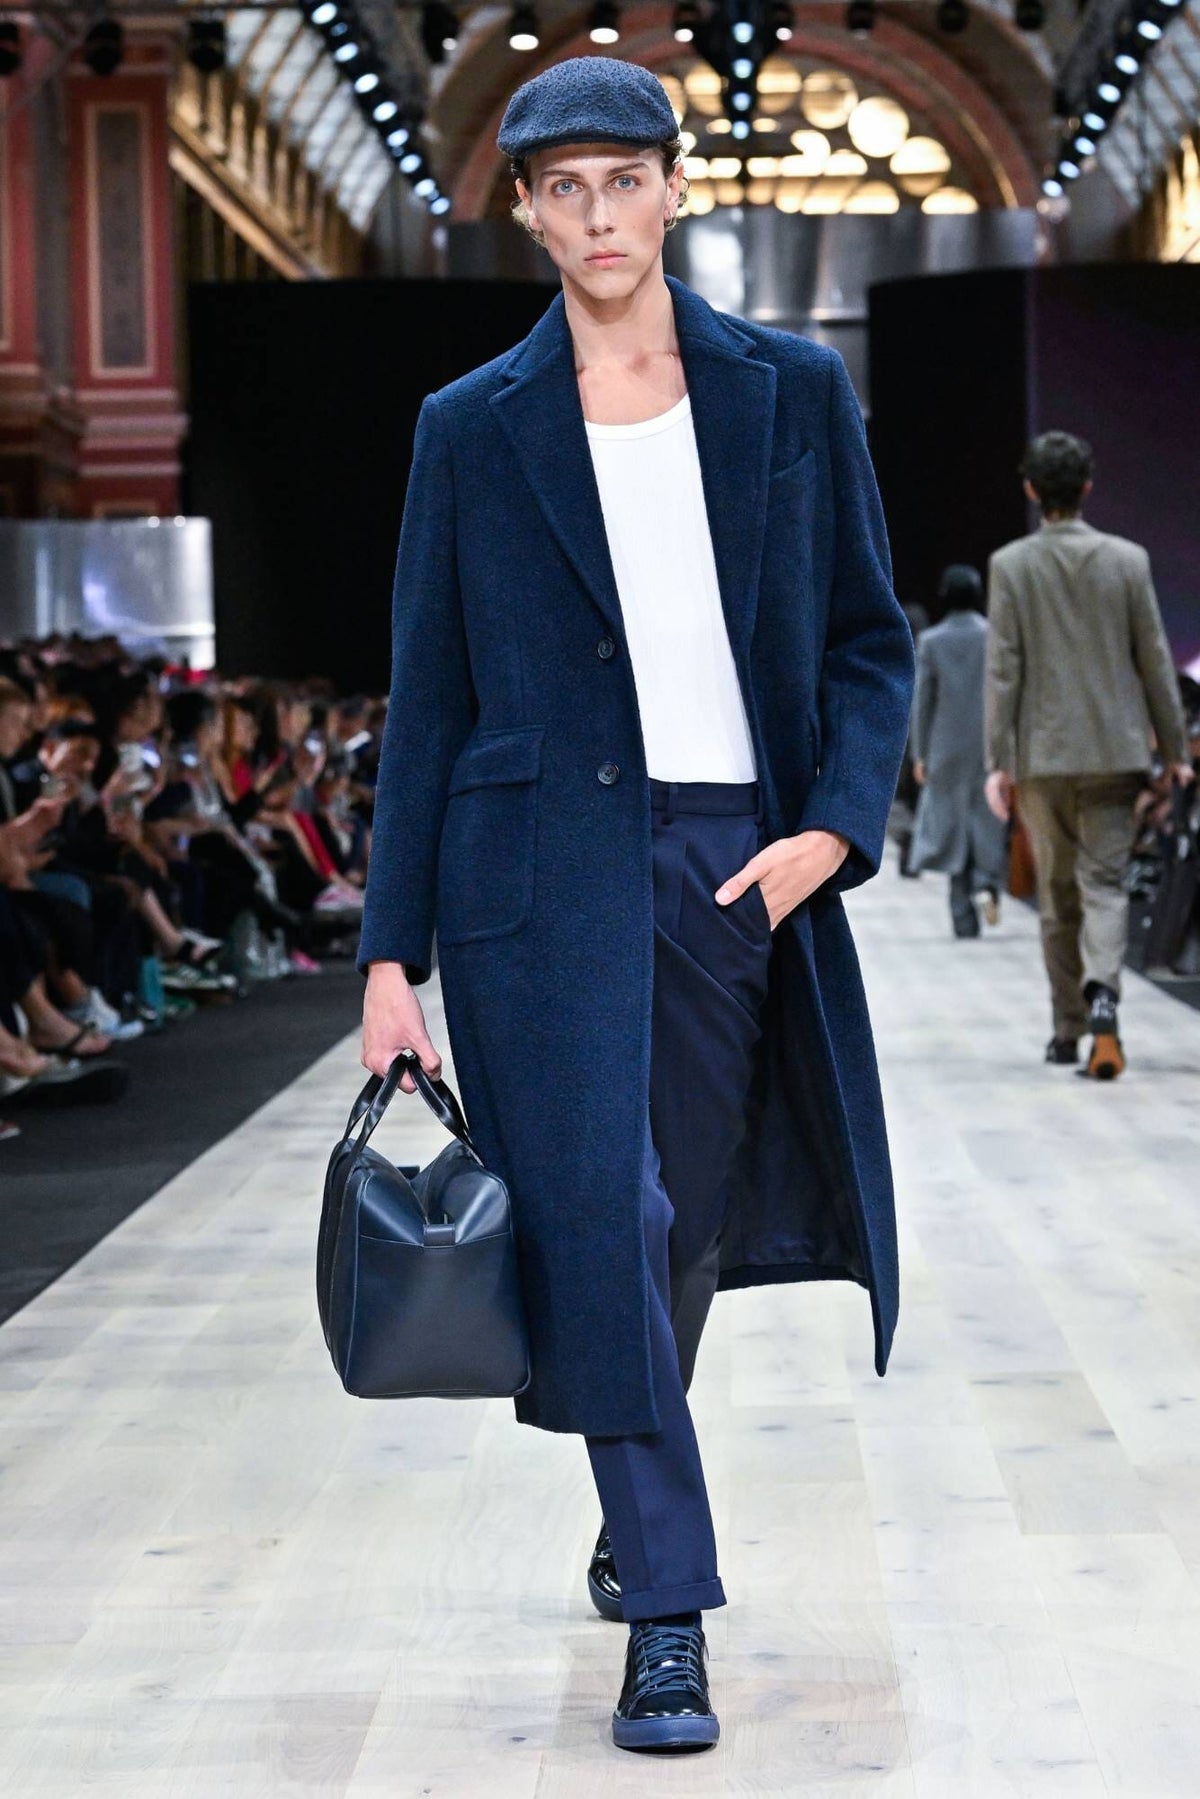 LOOK 10 - Long Carter Coat in Boiled Navy Wool and Navy Wool Gabardine Cali Trousers + The Marais Sneaker in Navy Patent Leather